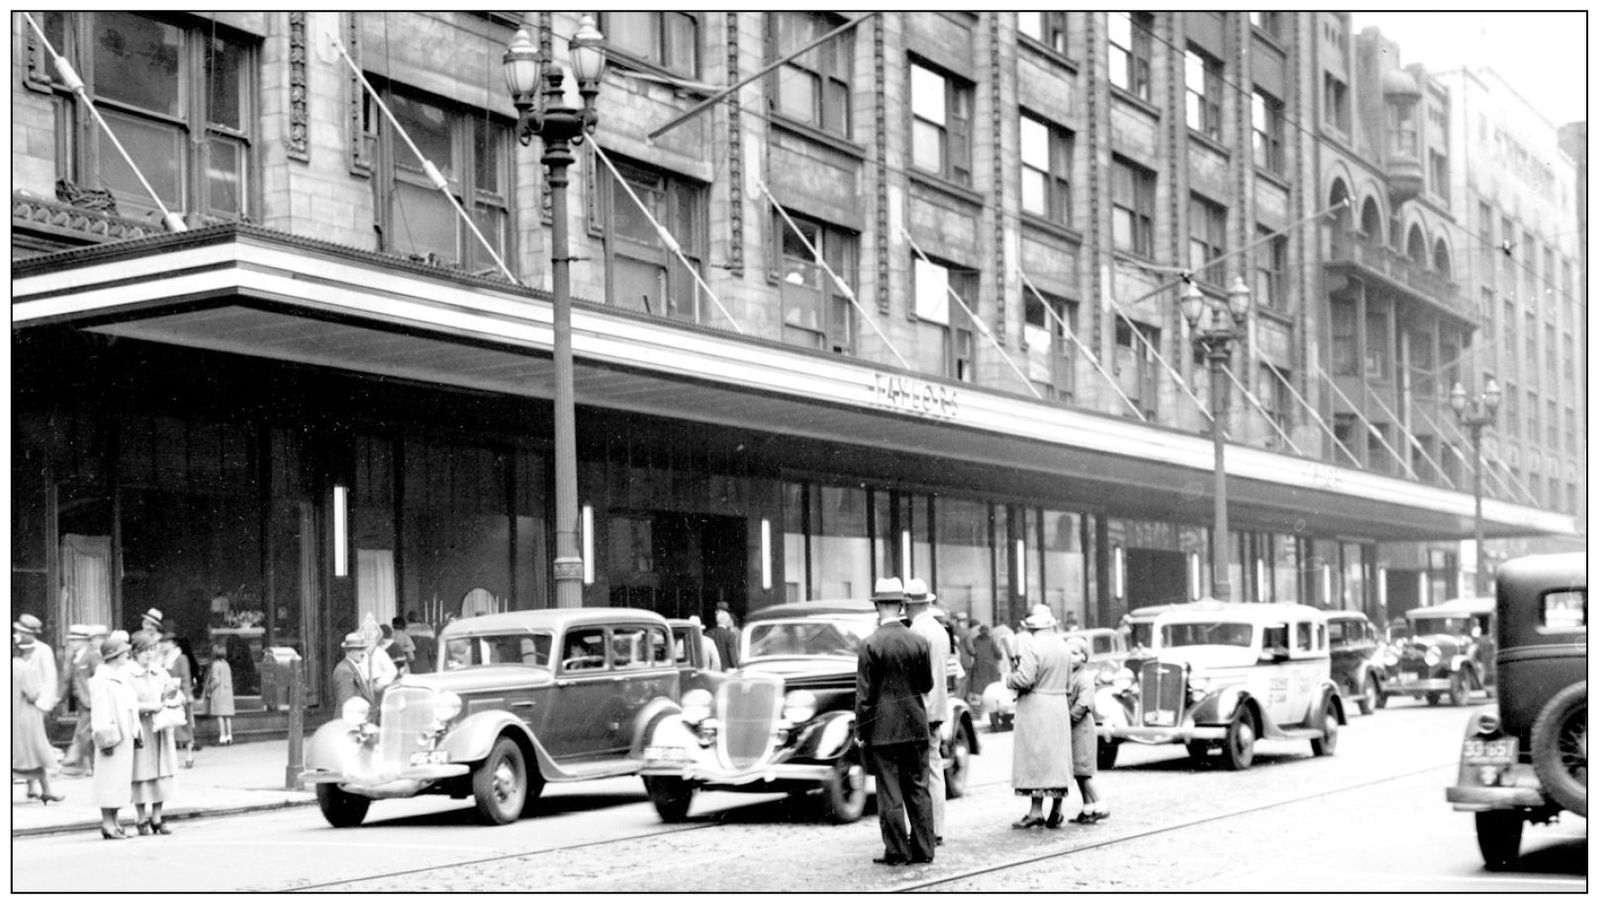 TAYLORS DEPARTMENT STORE Another major Cleveland department store was Taylors - photo 10